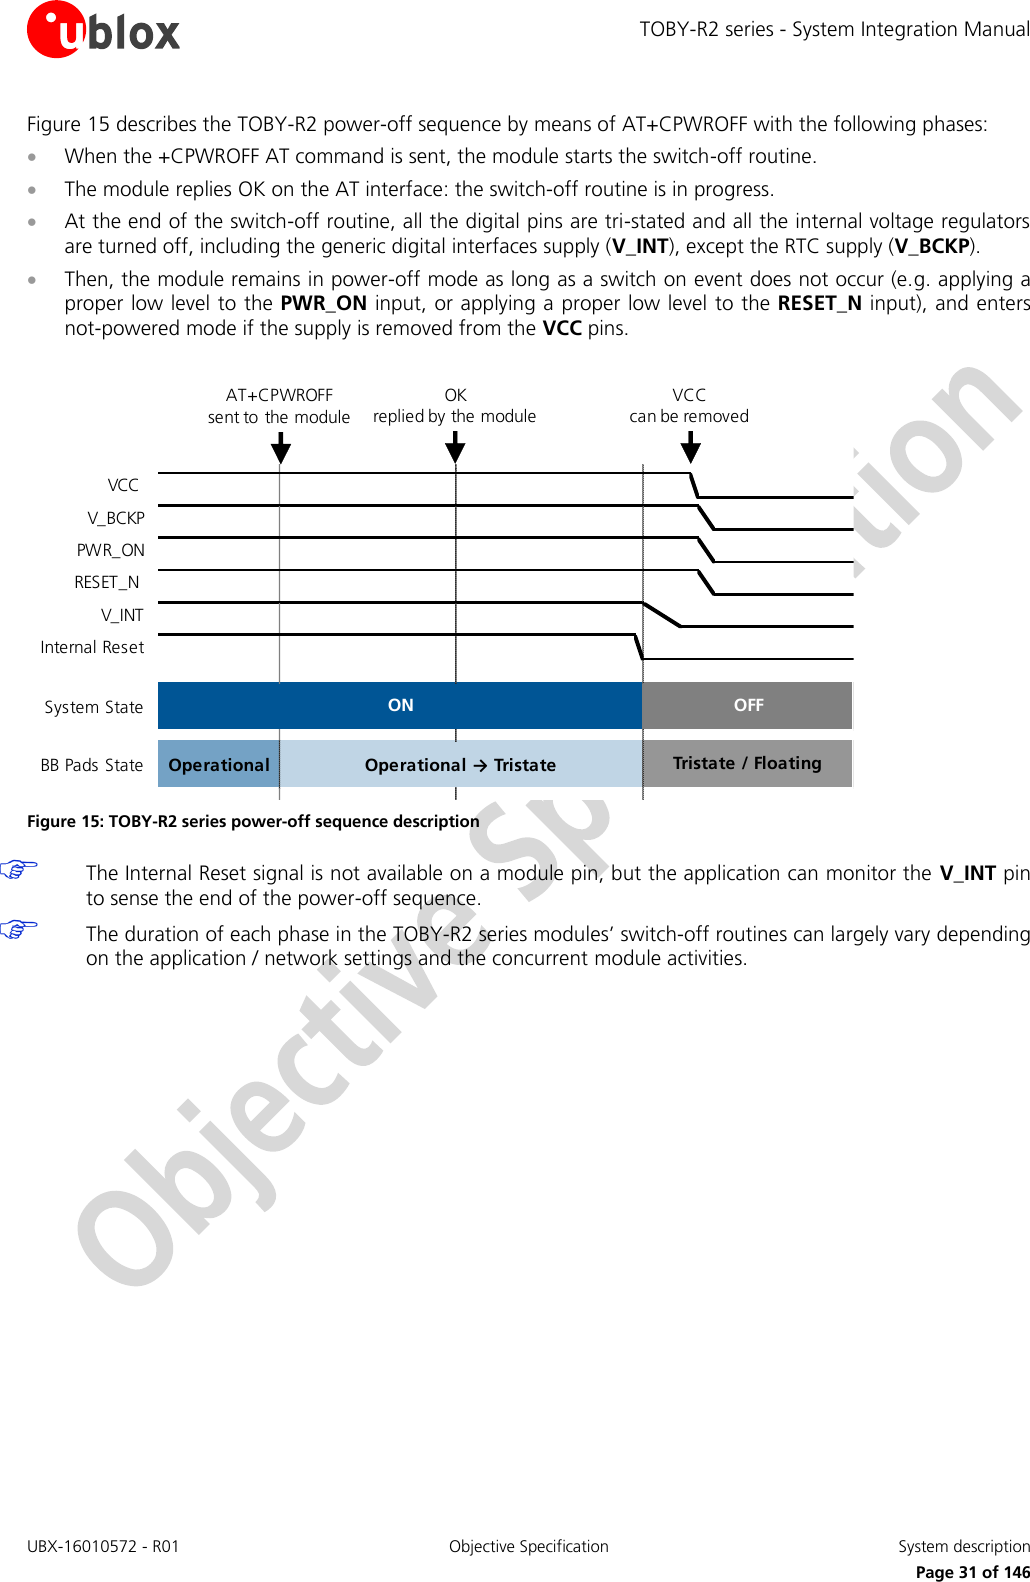 TOBY-R2 series - System Integration Manual UBX-16010572 - R01  Objective Specification  System description     Page 31 of 146 Figure 15 describes the TOBY-R2 power-off sequence by means of AT+CPWROFF with the following phases:  When the +CPWROFF AT command is sent, the module starts the switch-off routine.  The module replies OK on the AT interface: the switch-off routine is in progress.   At the end of the switch-off routine, all the digital pins are tri-stated and all the internal voltage regulators are turned off, including the generic digital interfaces supply (V_INT), except the RTC supply (V_BCKP).  Then, the module remains in power-off mode as long as a switch on event does not occur (e.g. applying a proper low level to the PWR_ON input, or applying a proper low level to the RESET_N input), and enters not-powered mode if the supply is removed from the VCC pins.  VCC V_BCKPPWR_ONRESET_N V_INTInternal ResetSystem StateBB Pads State OperationalOFFTristate / FloatingONOperational → TristateAT+CPWROFFsent to the module0 s~2.5 s~5 sOKreplied by the moduleVCC                can be removed Figure 15: TOBY-R2 series power-off sequence description  The Internal Reset signal is not available on a module pin, but the application can monitor the V_INT pin to sense the end of the power-off sequence.  The duration of each phase in the TOBY-R2 series modules’ switch-off routines can largely vary depending on the application / network settings and the concurrent module activities.  